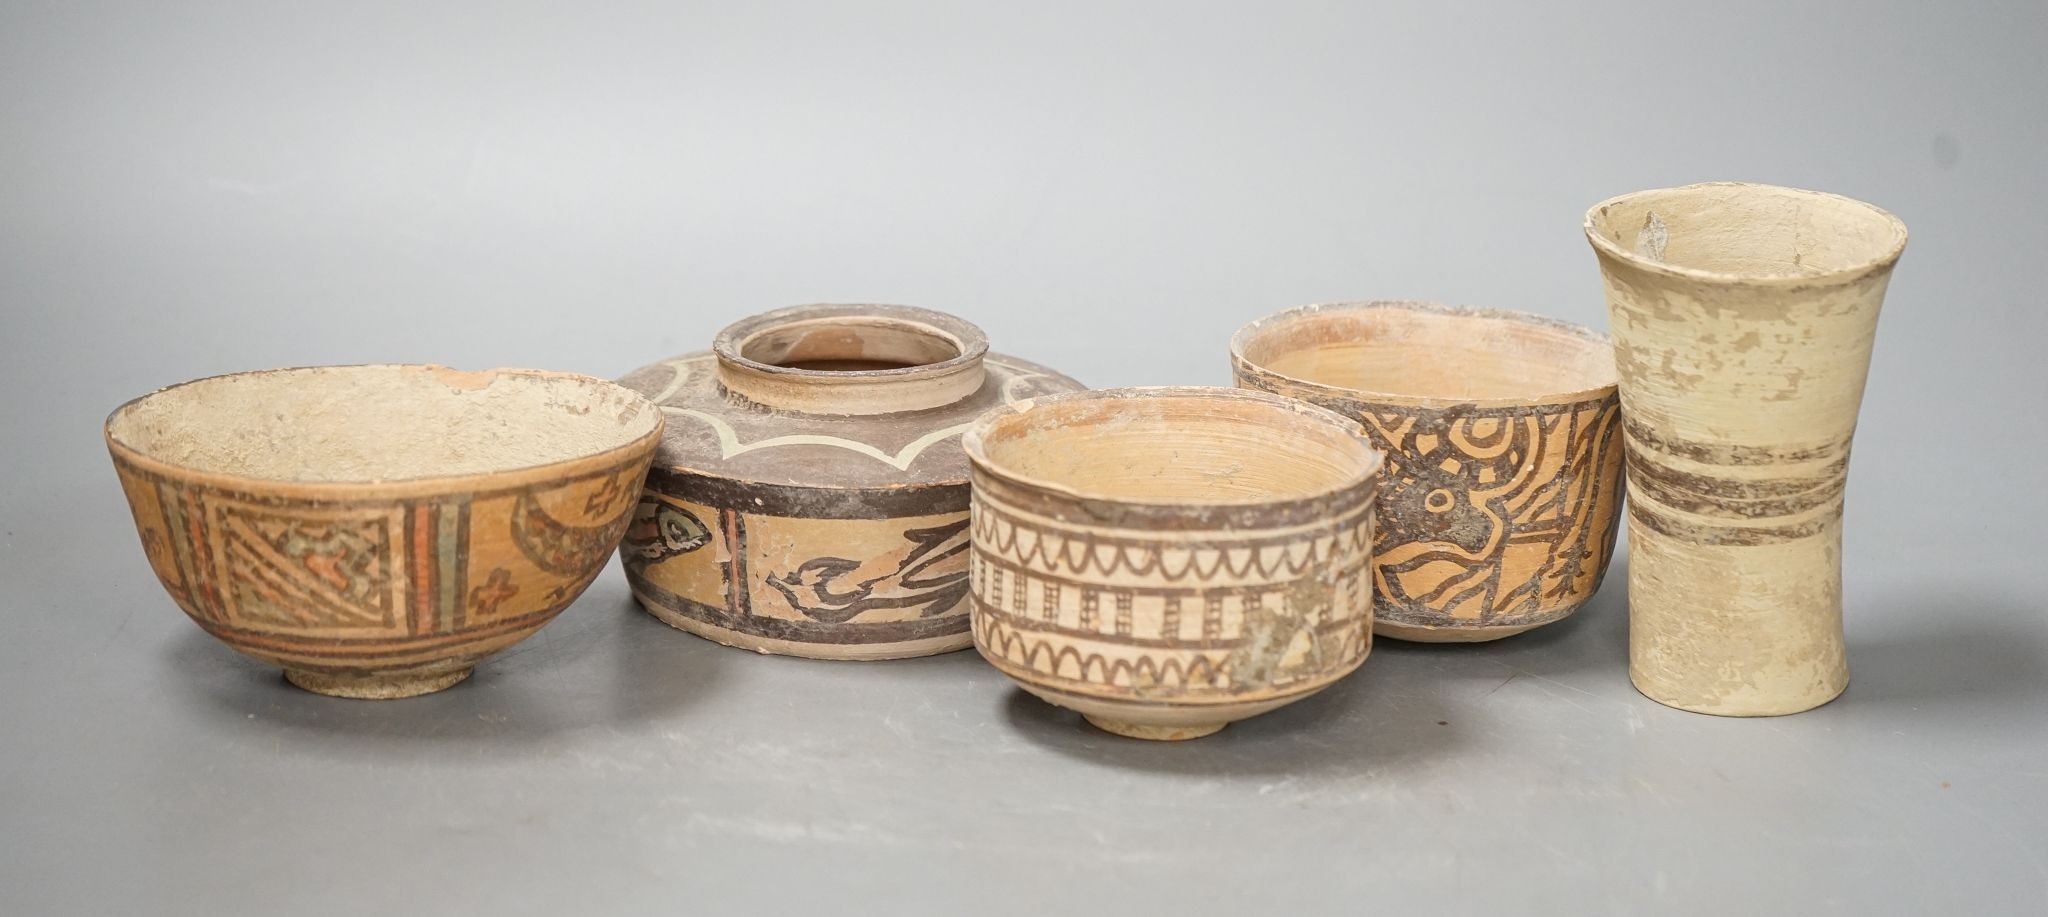 Five Indus Valley pottery vessels, neolithic, tallest 11cm